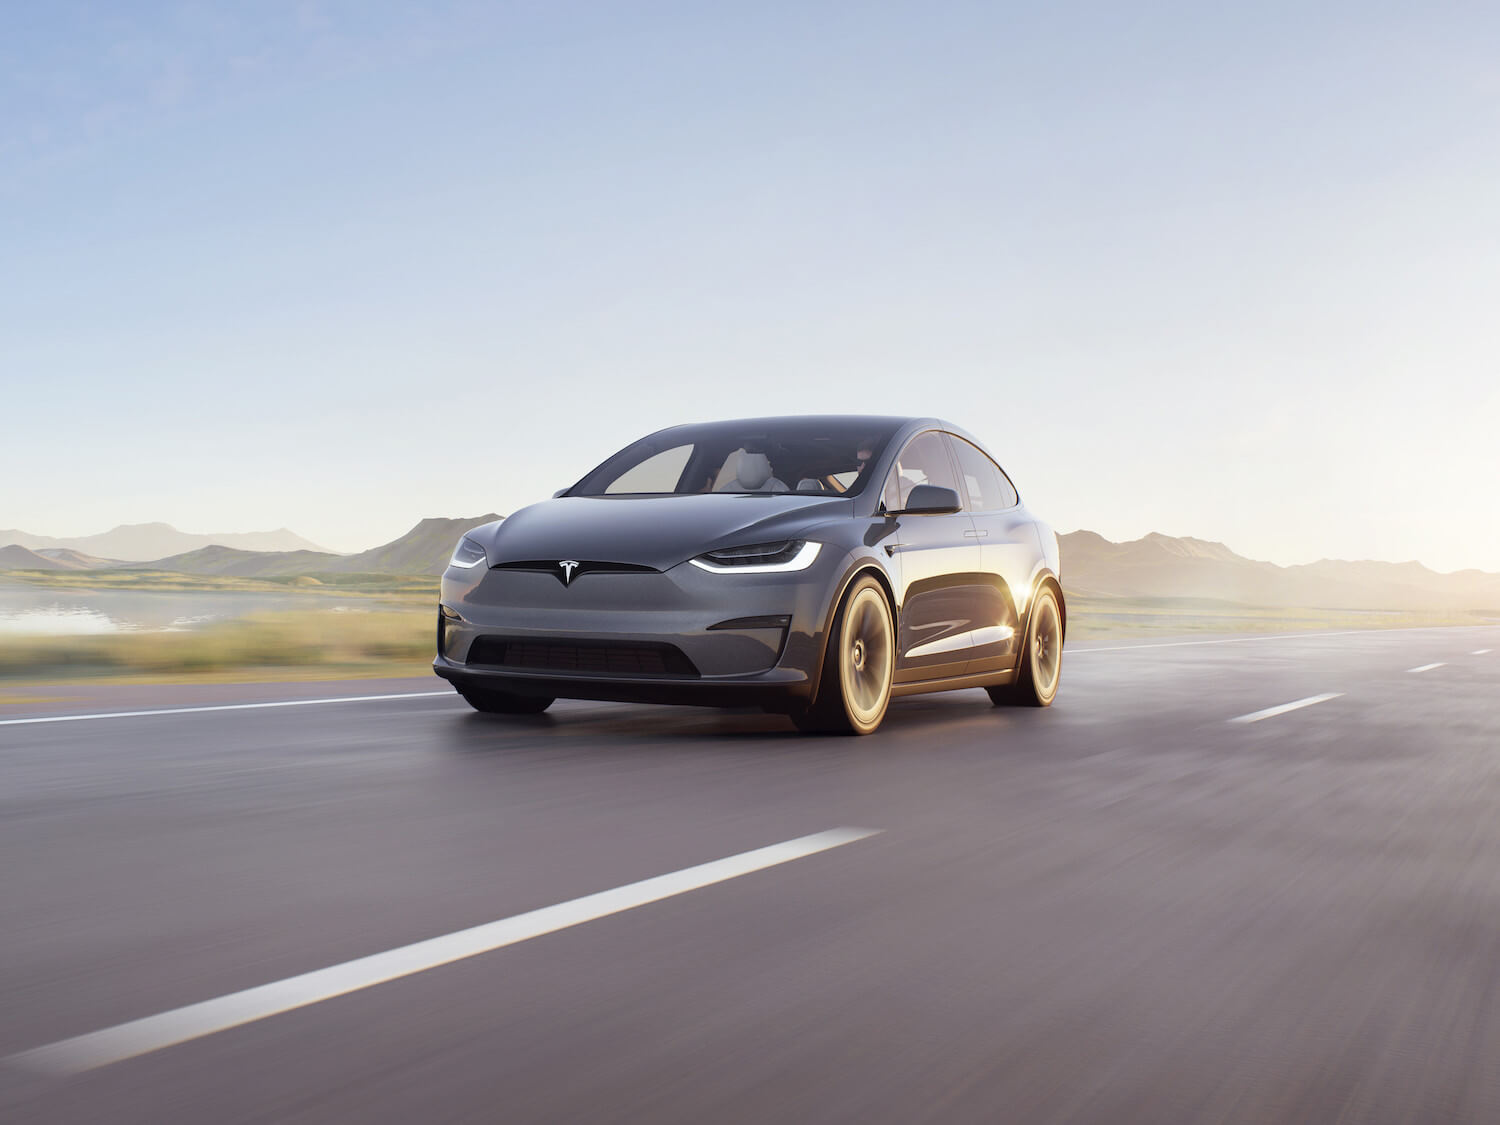 A gray Tesla Model X with incredible resale value driving down a desert road